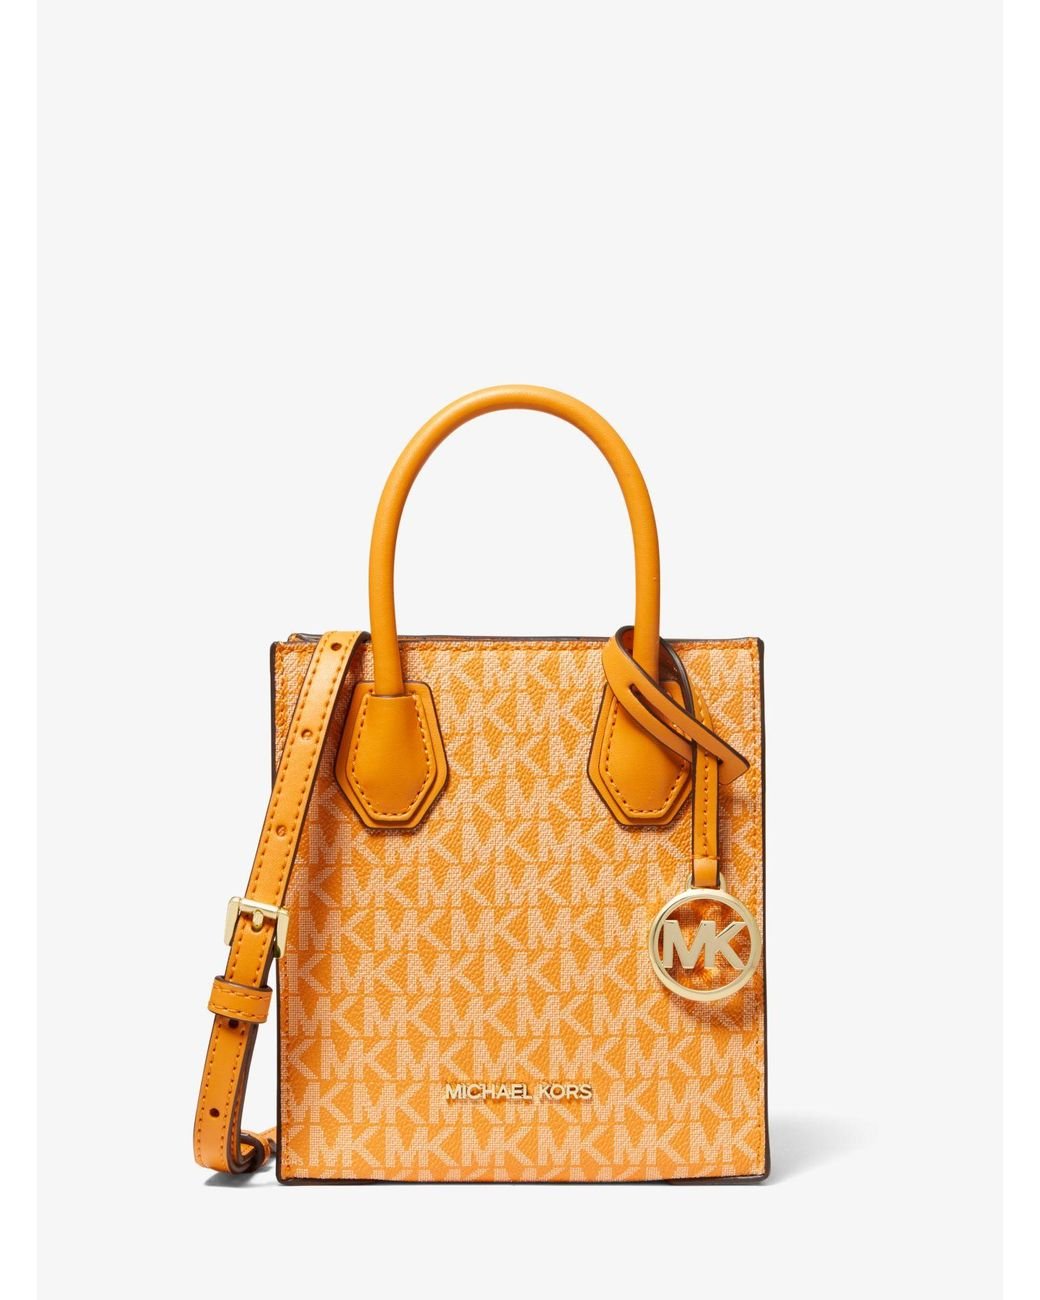 Michael Kors Mercer Extra-small Logo And Leather Crossbody Bag in Orange |  Lyst